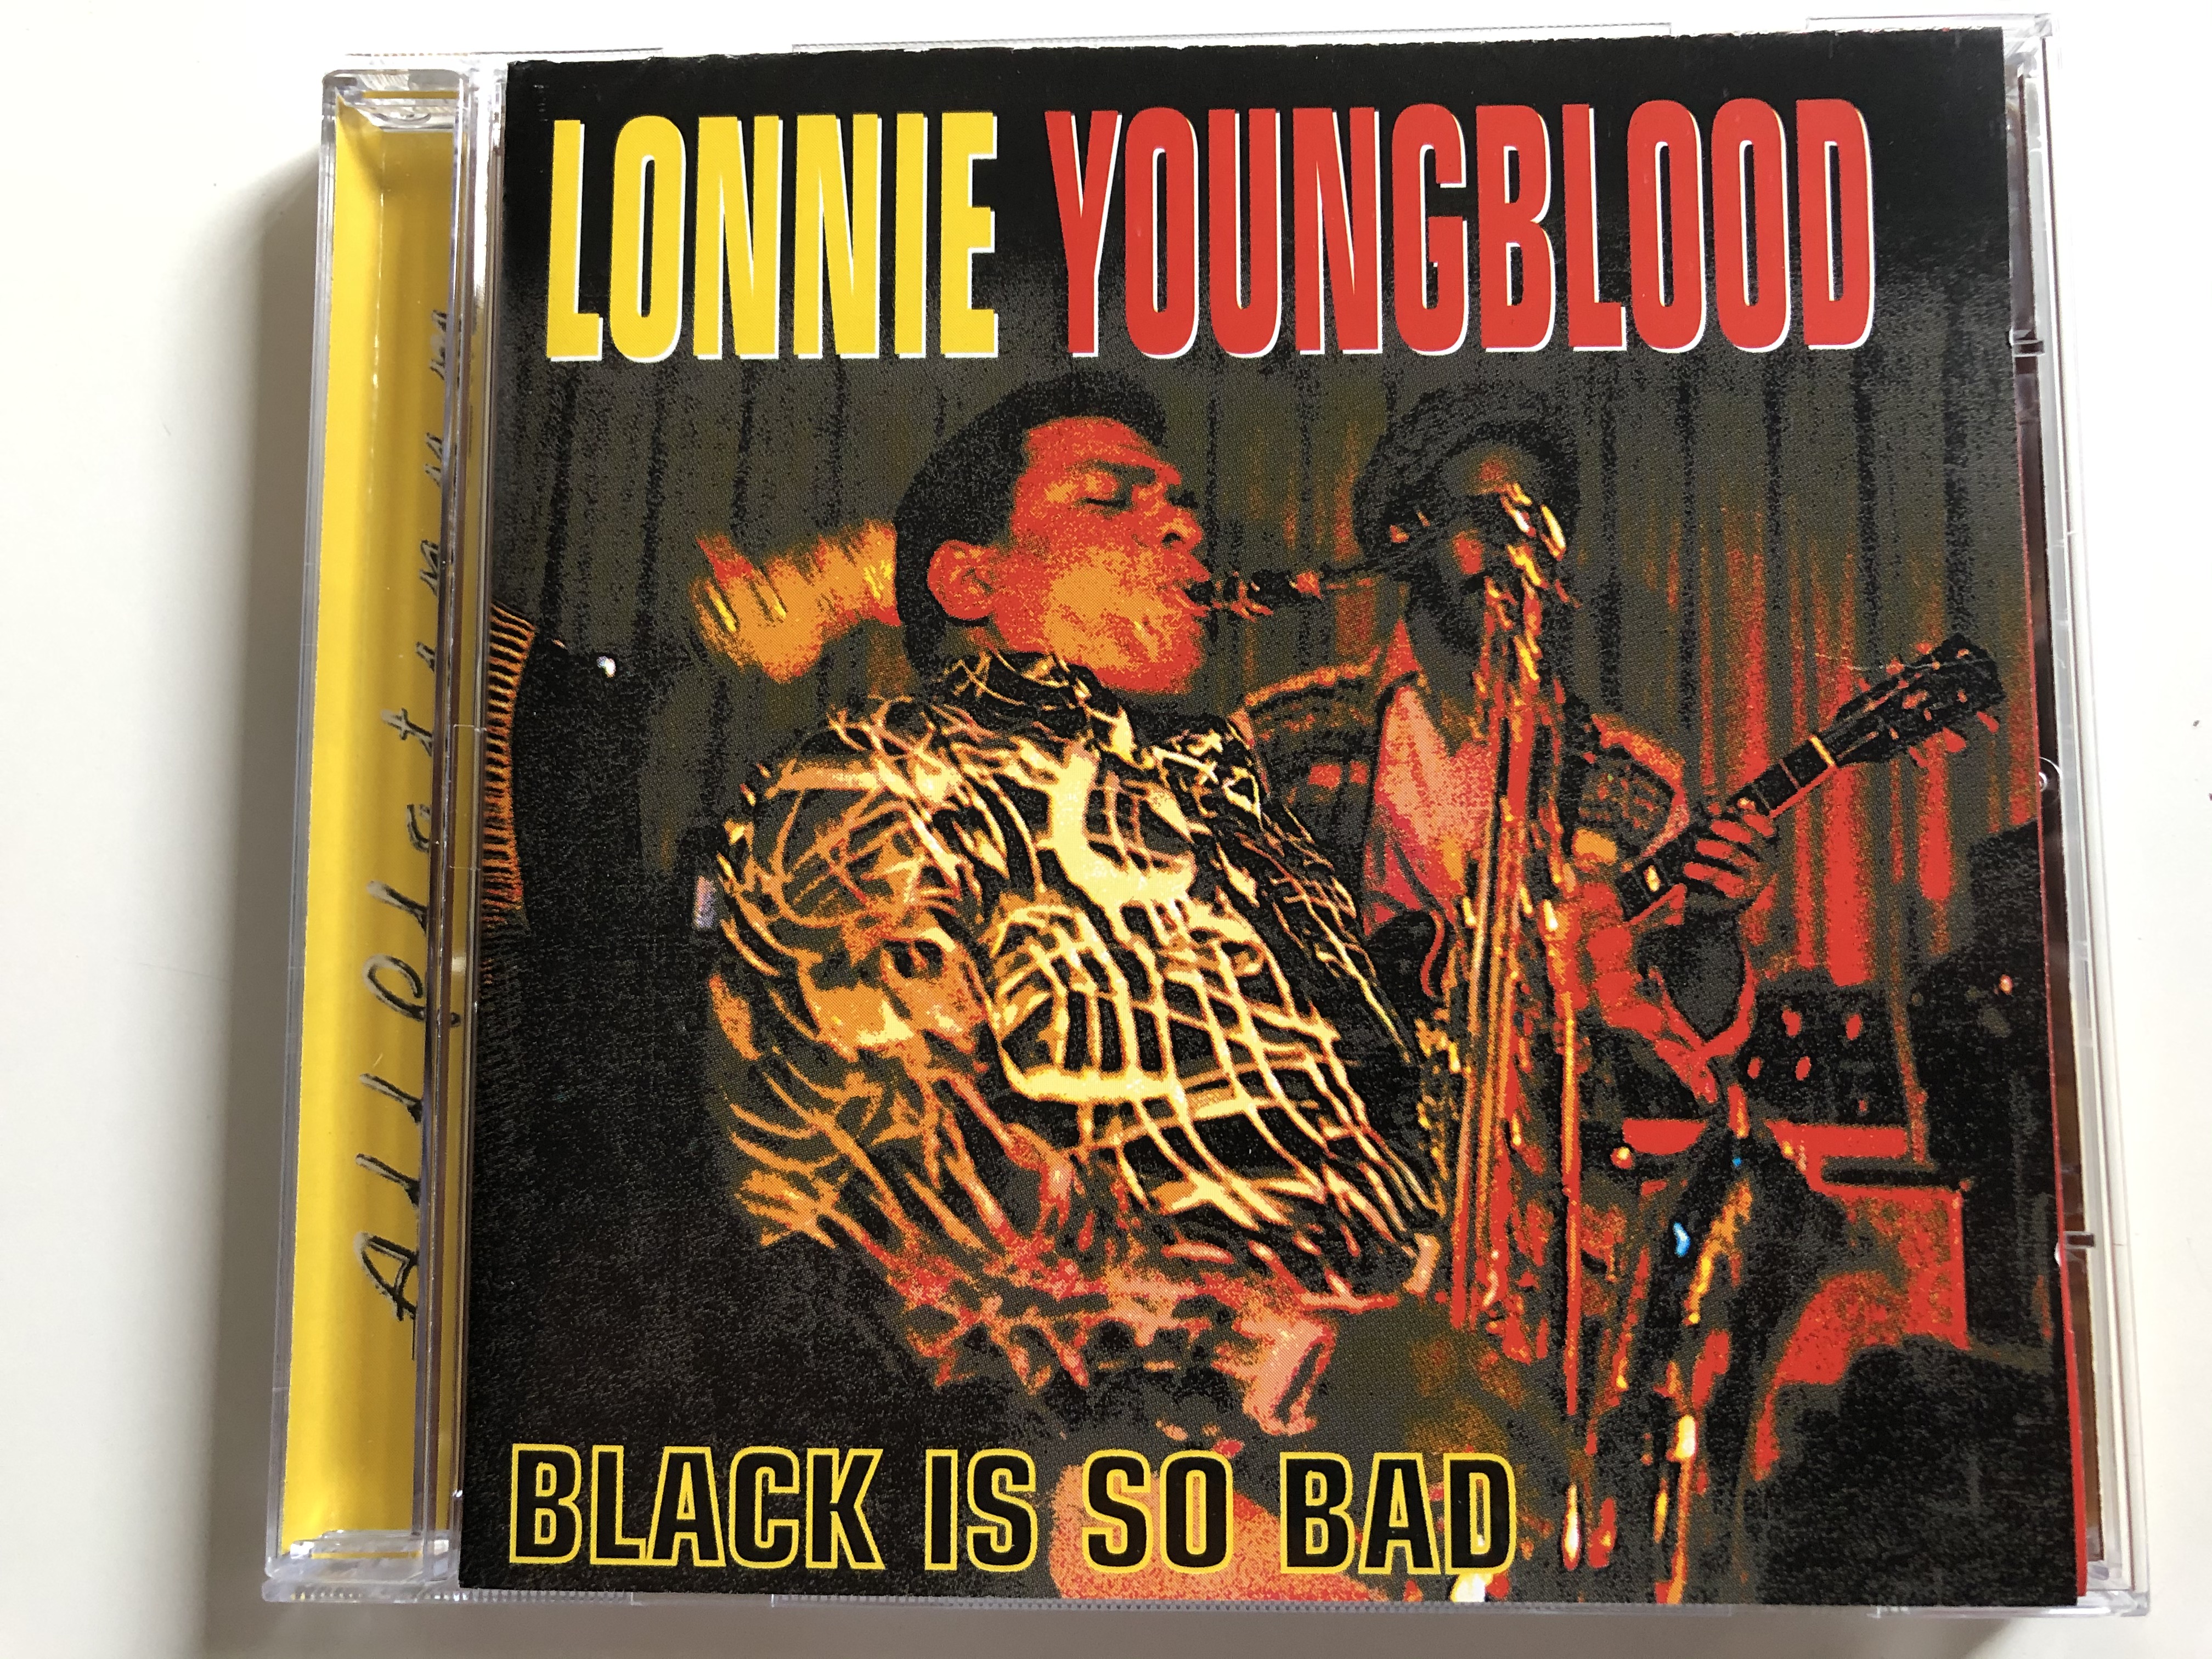 lonnie-youngblood-black-is-so-bad-sequel-records-audio-cd-2000-nemcd-356-1-.jpg